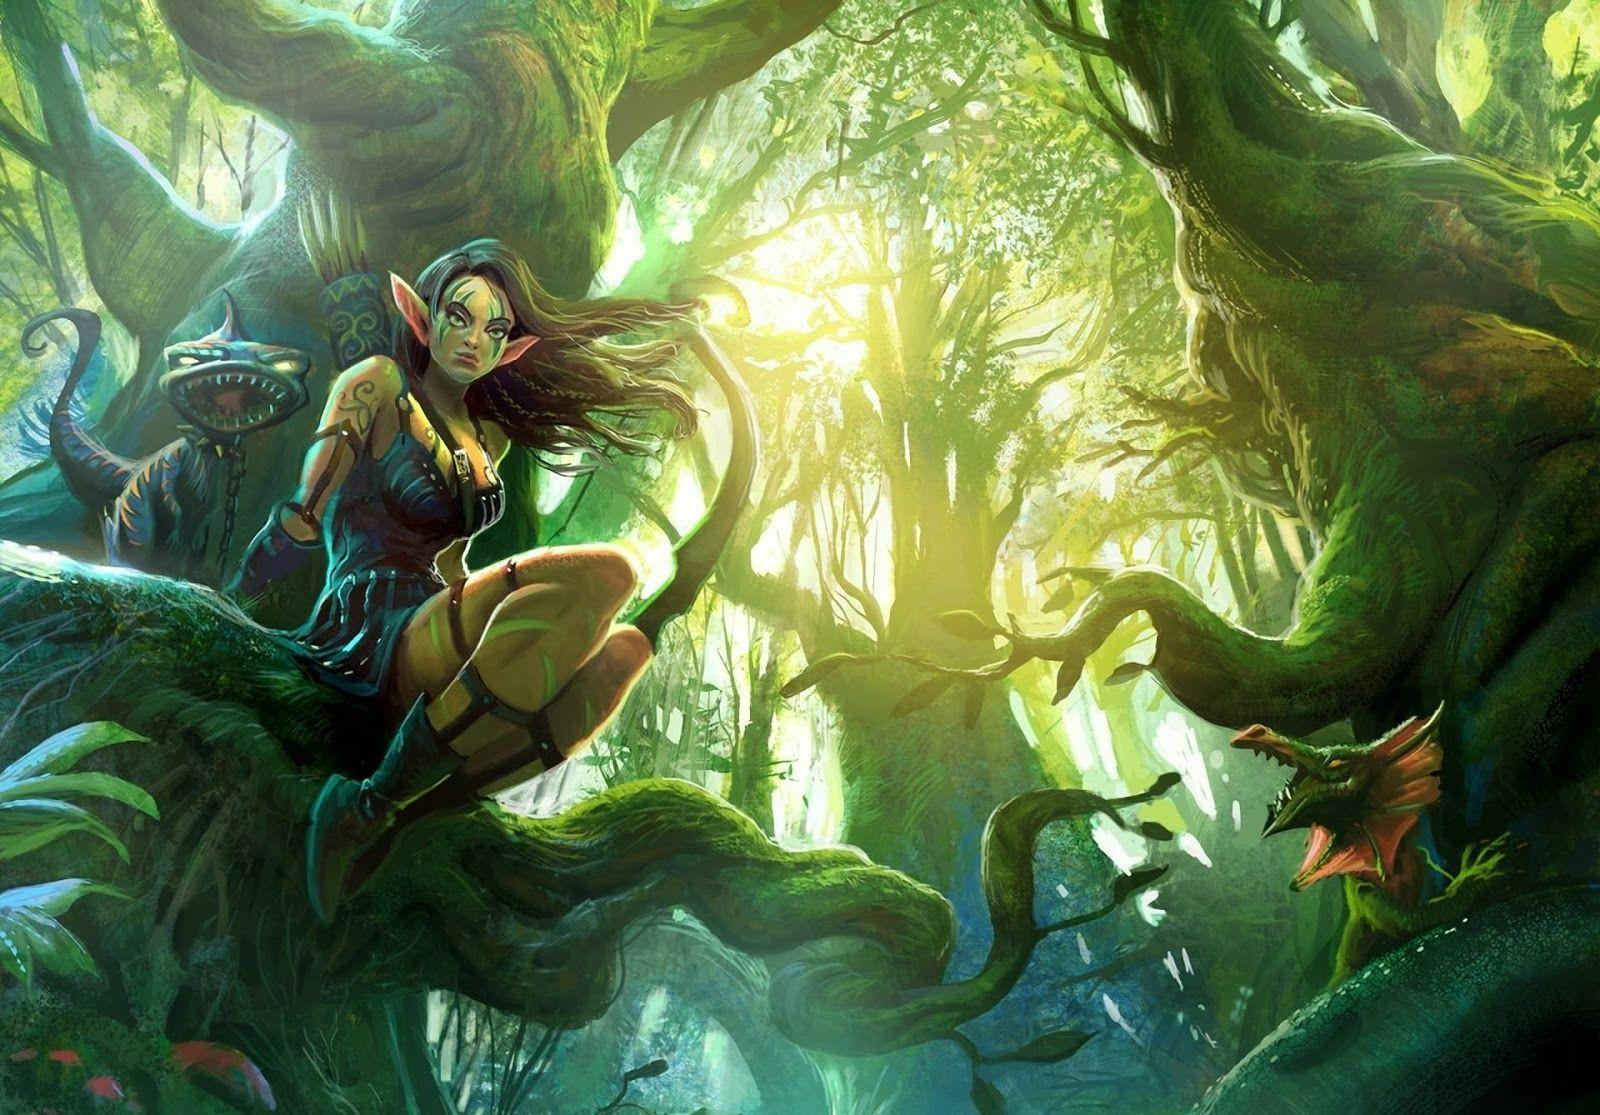 Elf and monsters in fantasy forest. EMERALD CITY